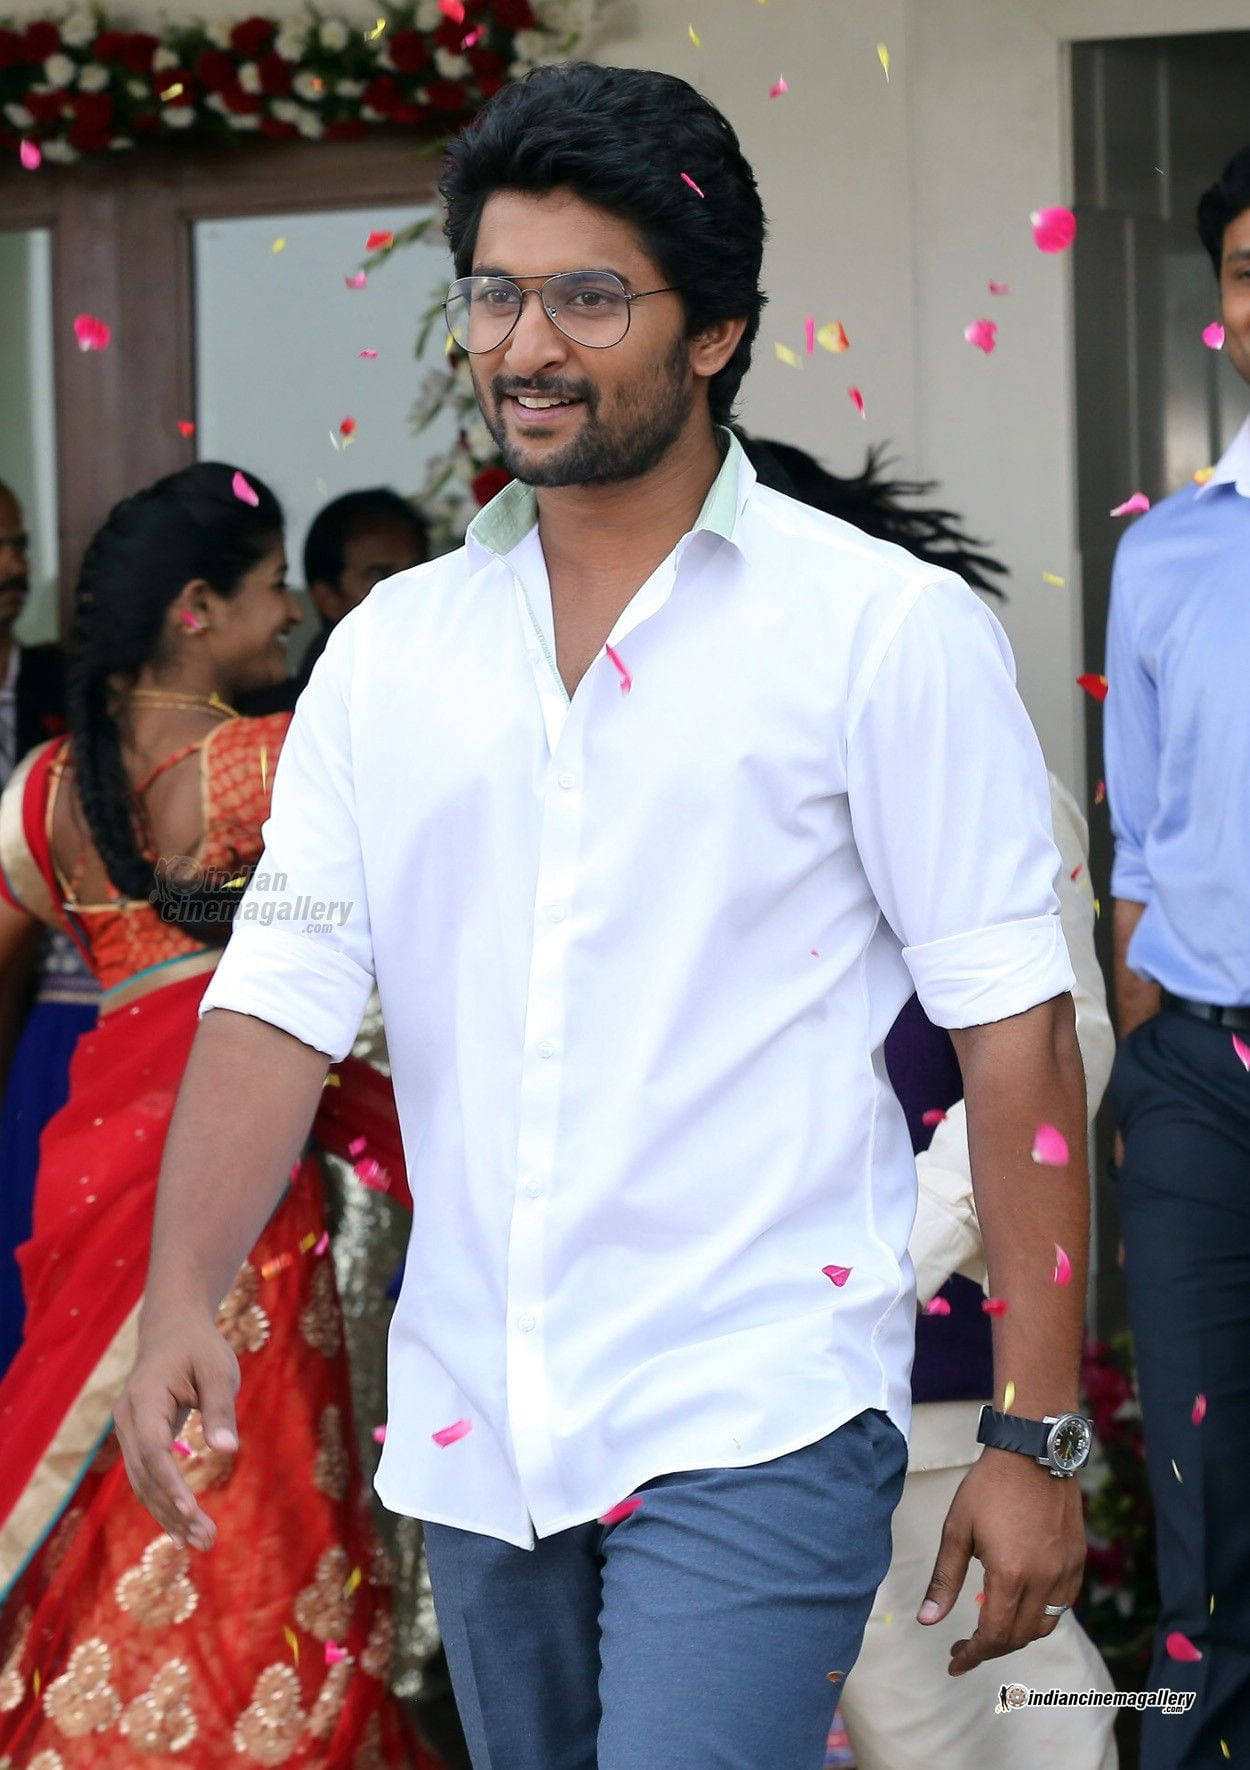 Dashing Look Of Actor Nani In Casual White Outfit